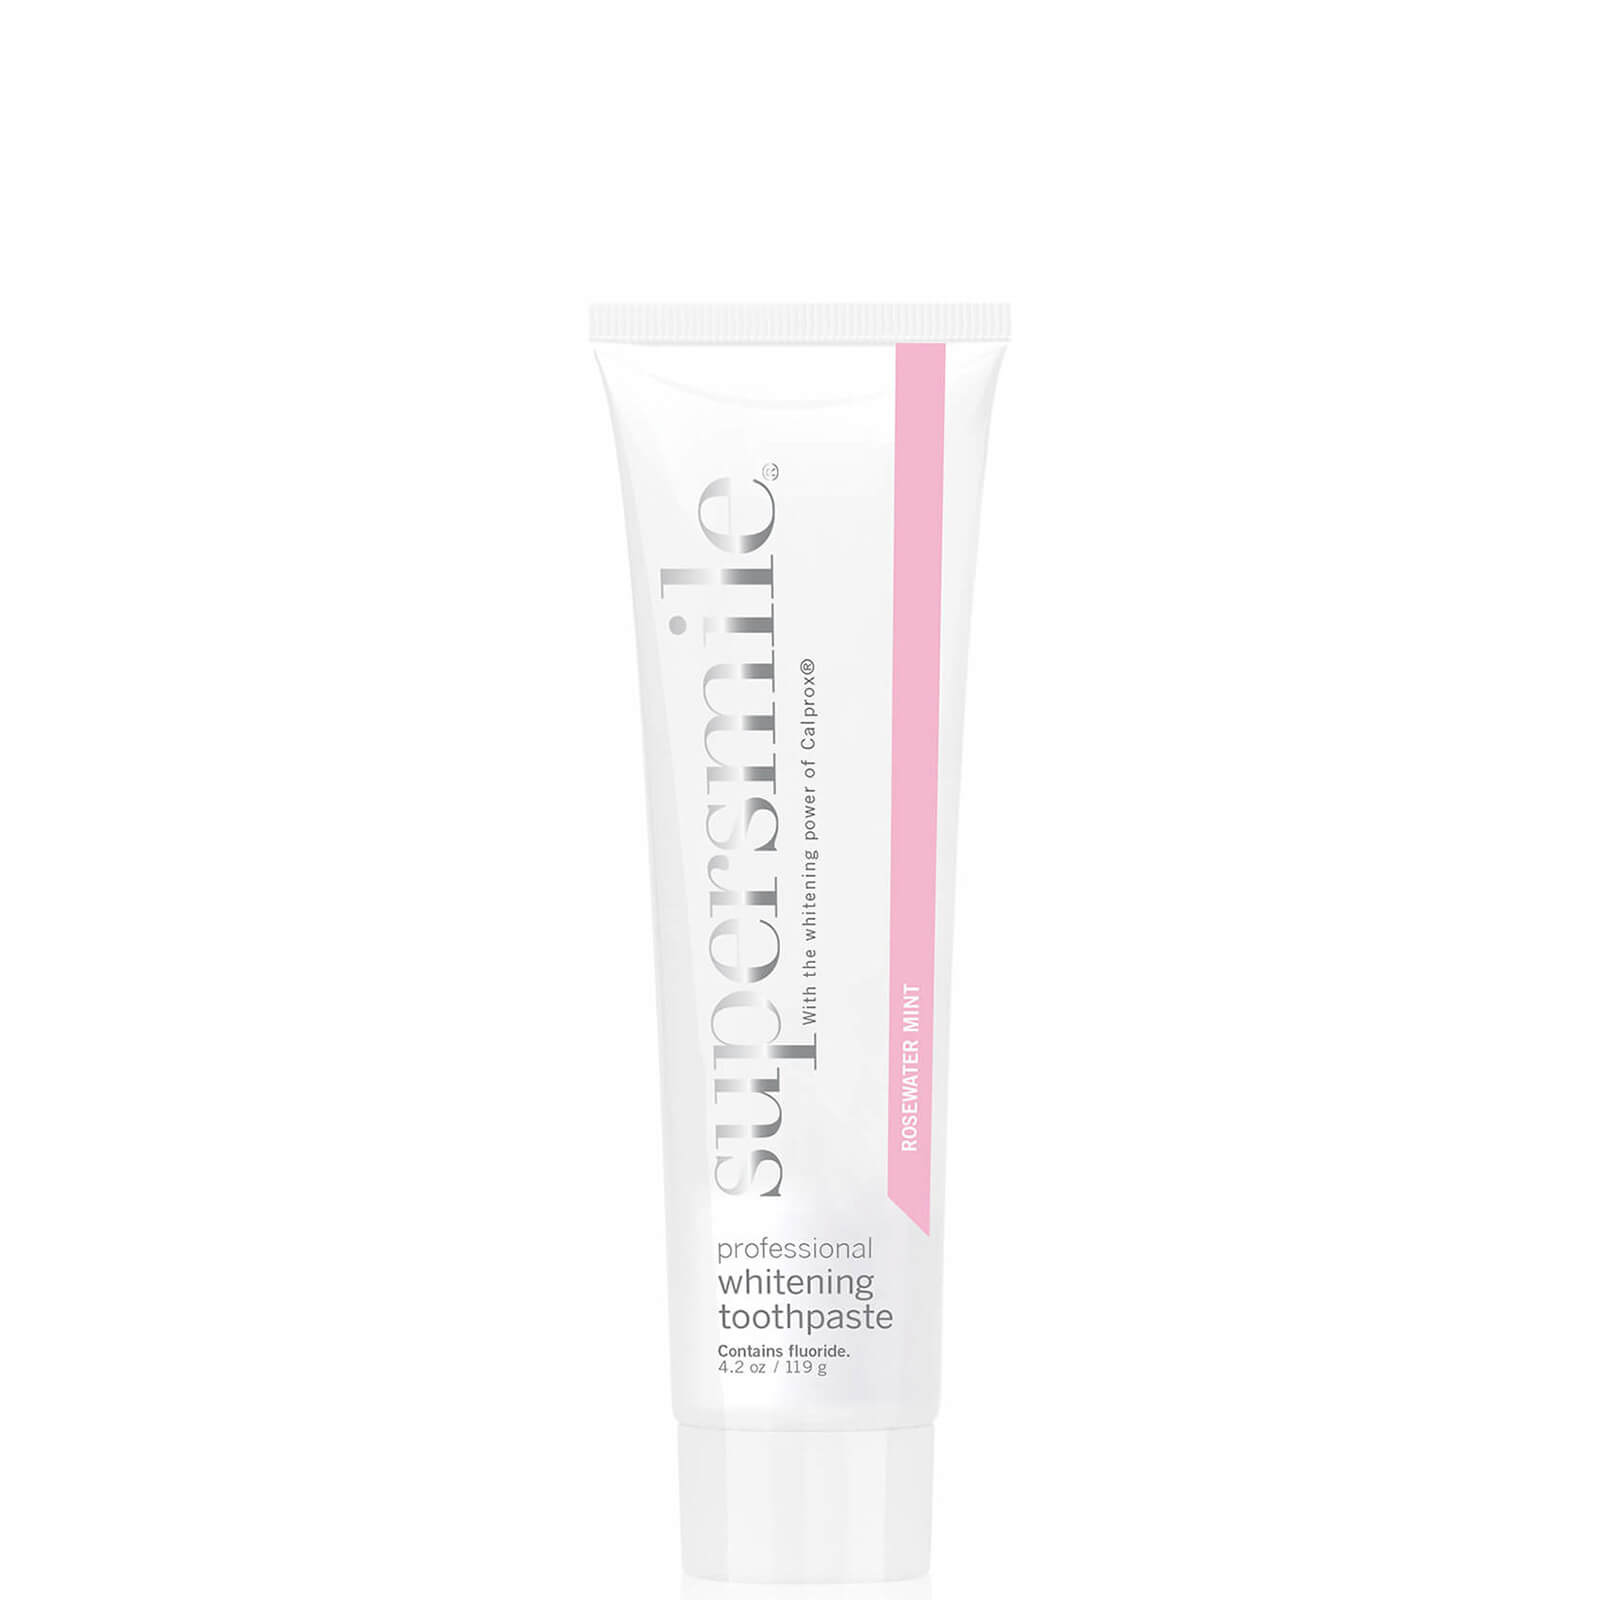 Supersmile Professional Whitening Toothpaste - Rosewater Mint 4.2 oz.